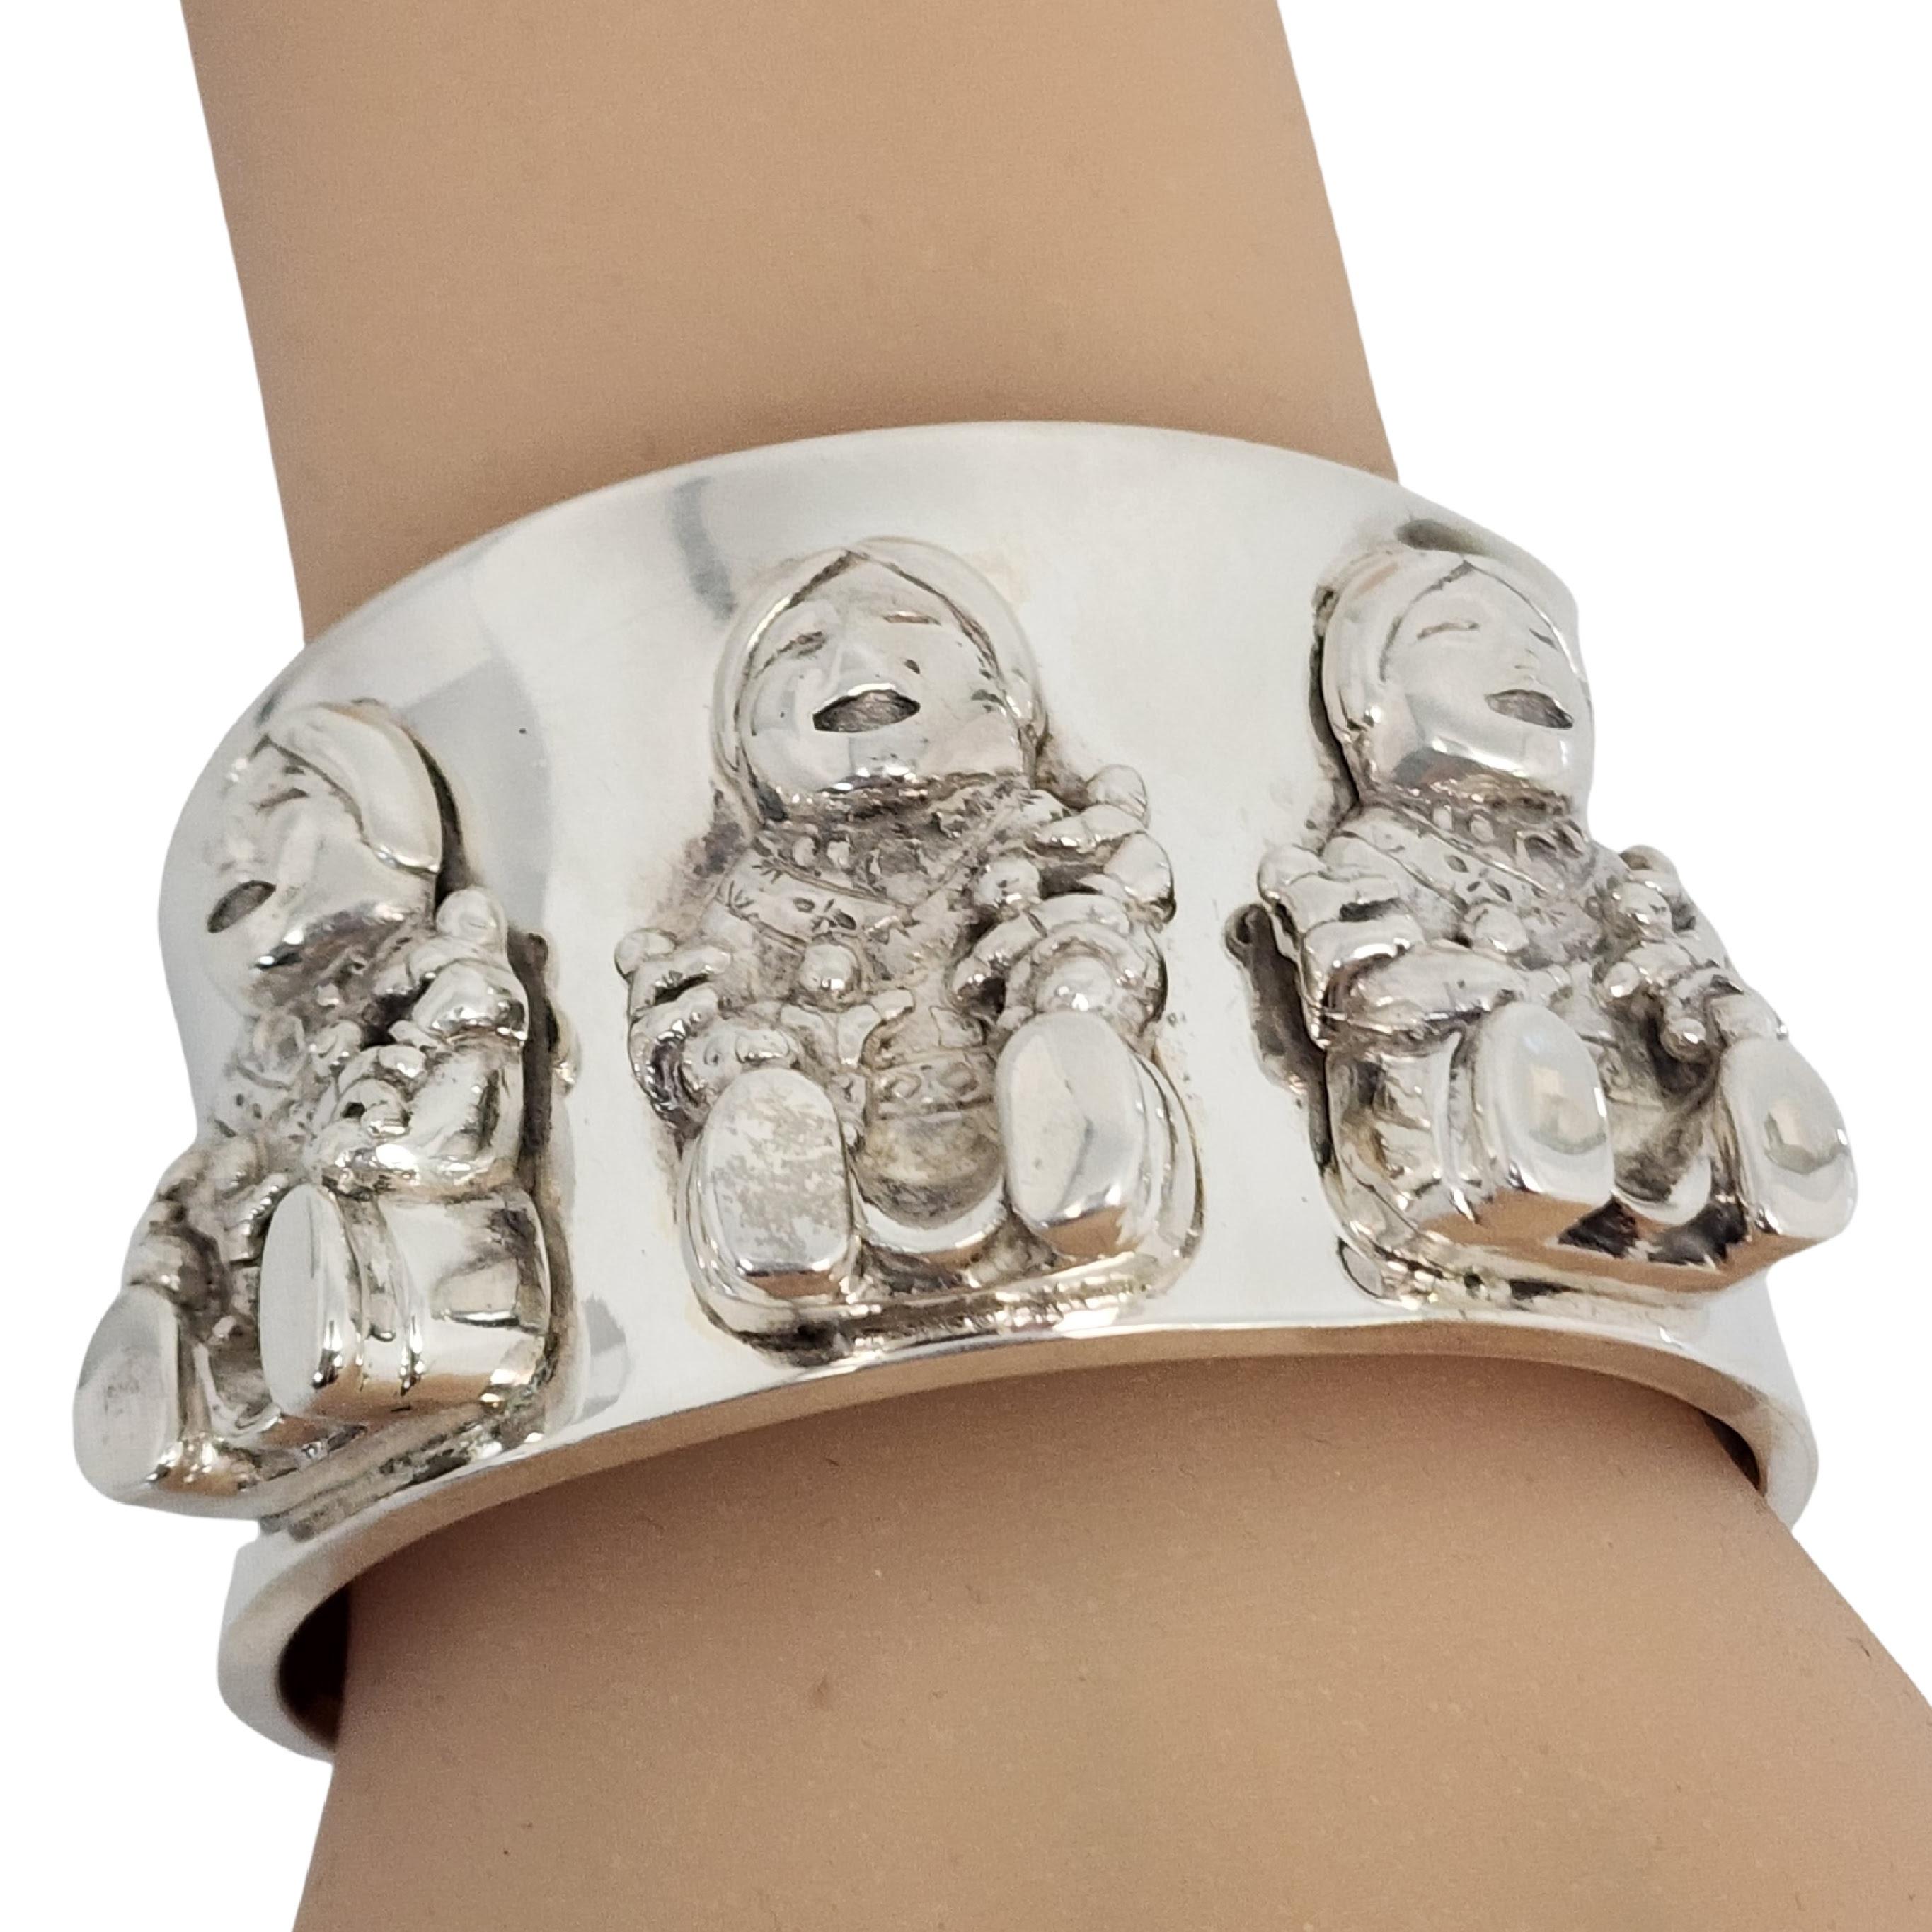 Sterling silver storyteller cuff bracelet by Carol Felley.

Beautiful storyteller bracelet inspired by Pueblo pottery featuring 3 large applied mothers and their children singing songs of tribal stories.

Measures approx 6